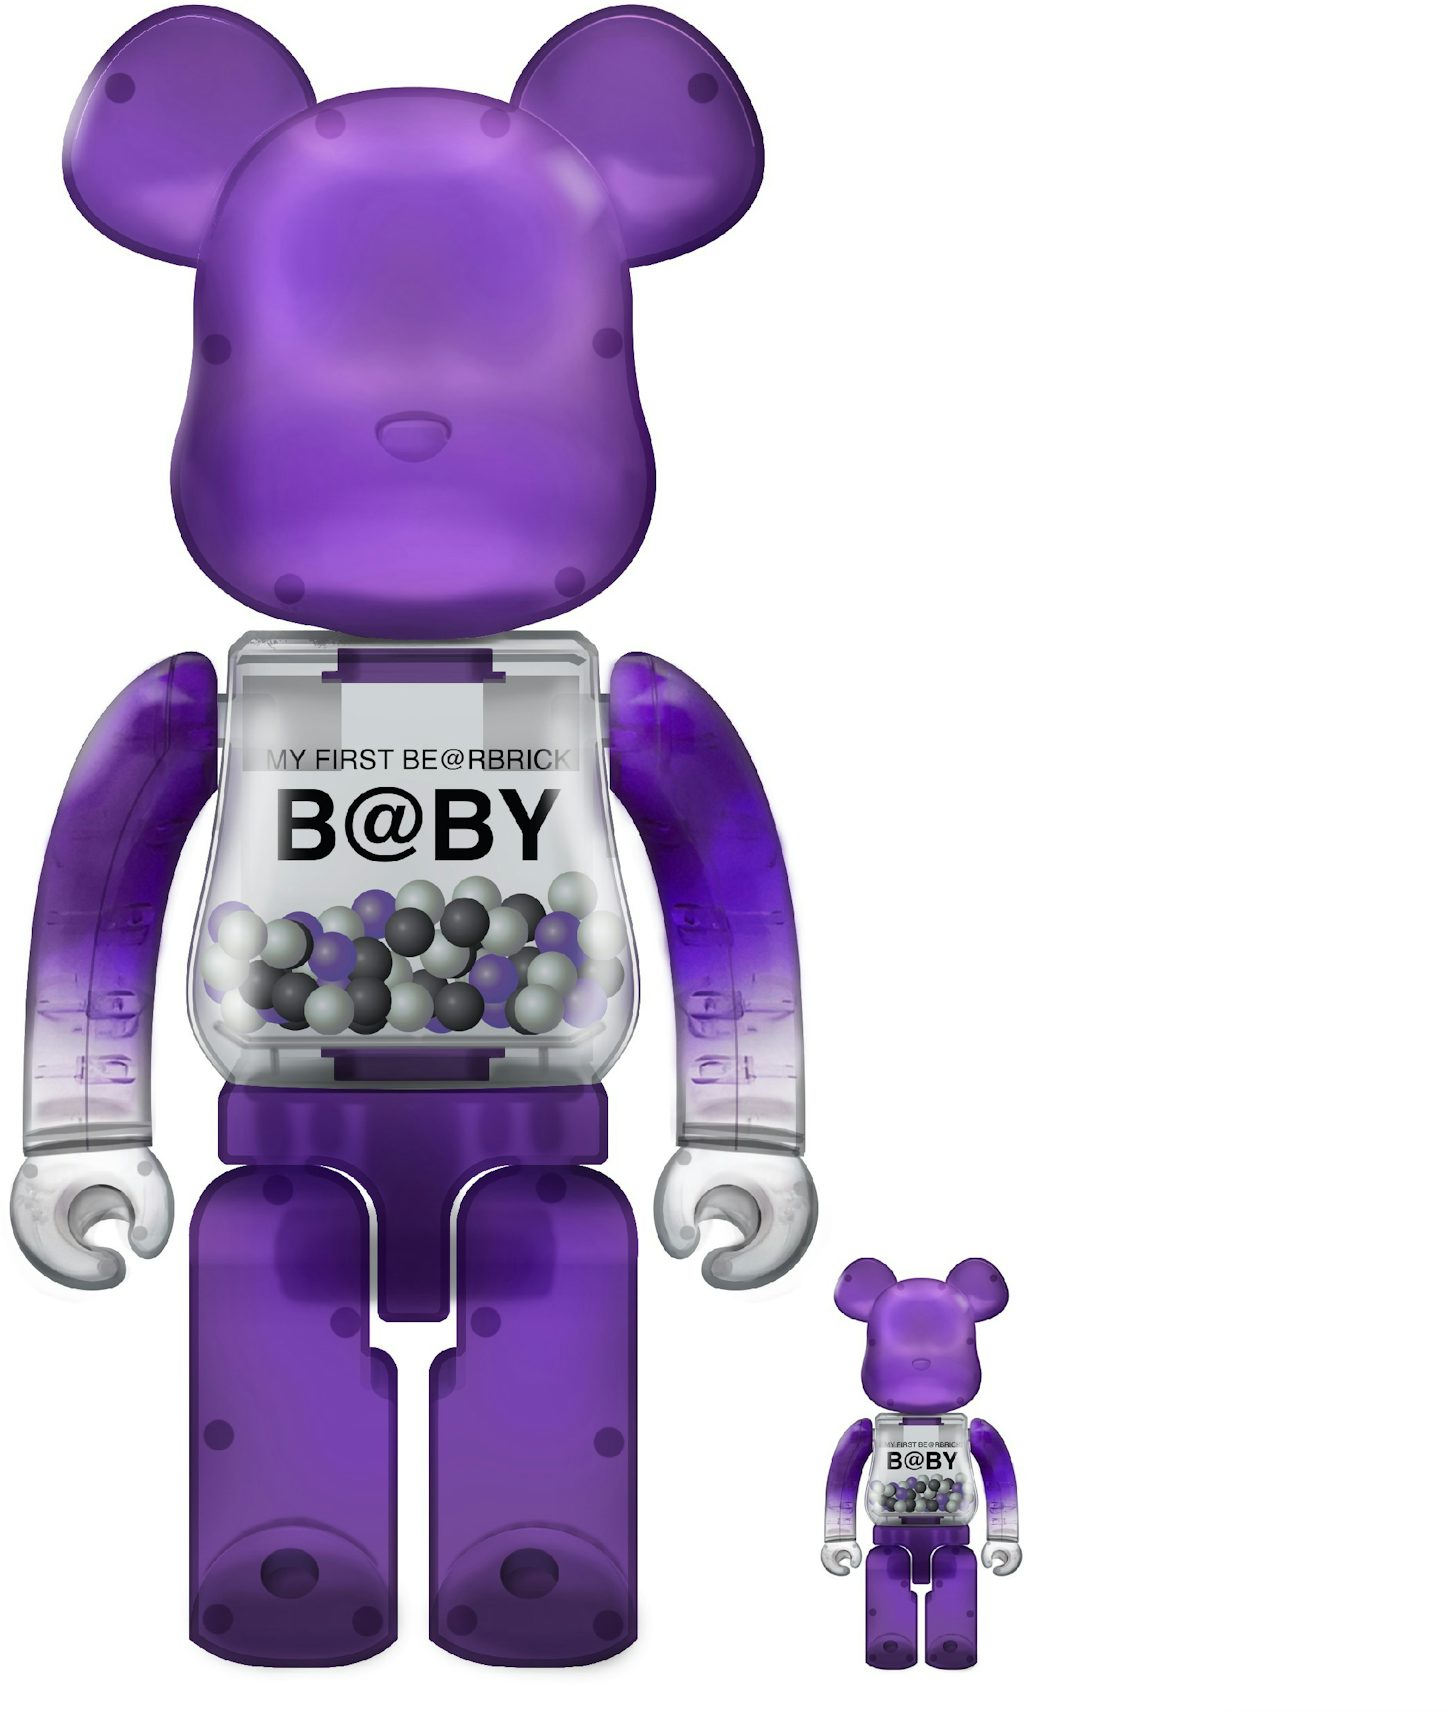 100%/400% Bearbrick My First B@by Innersect